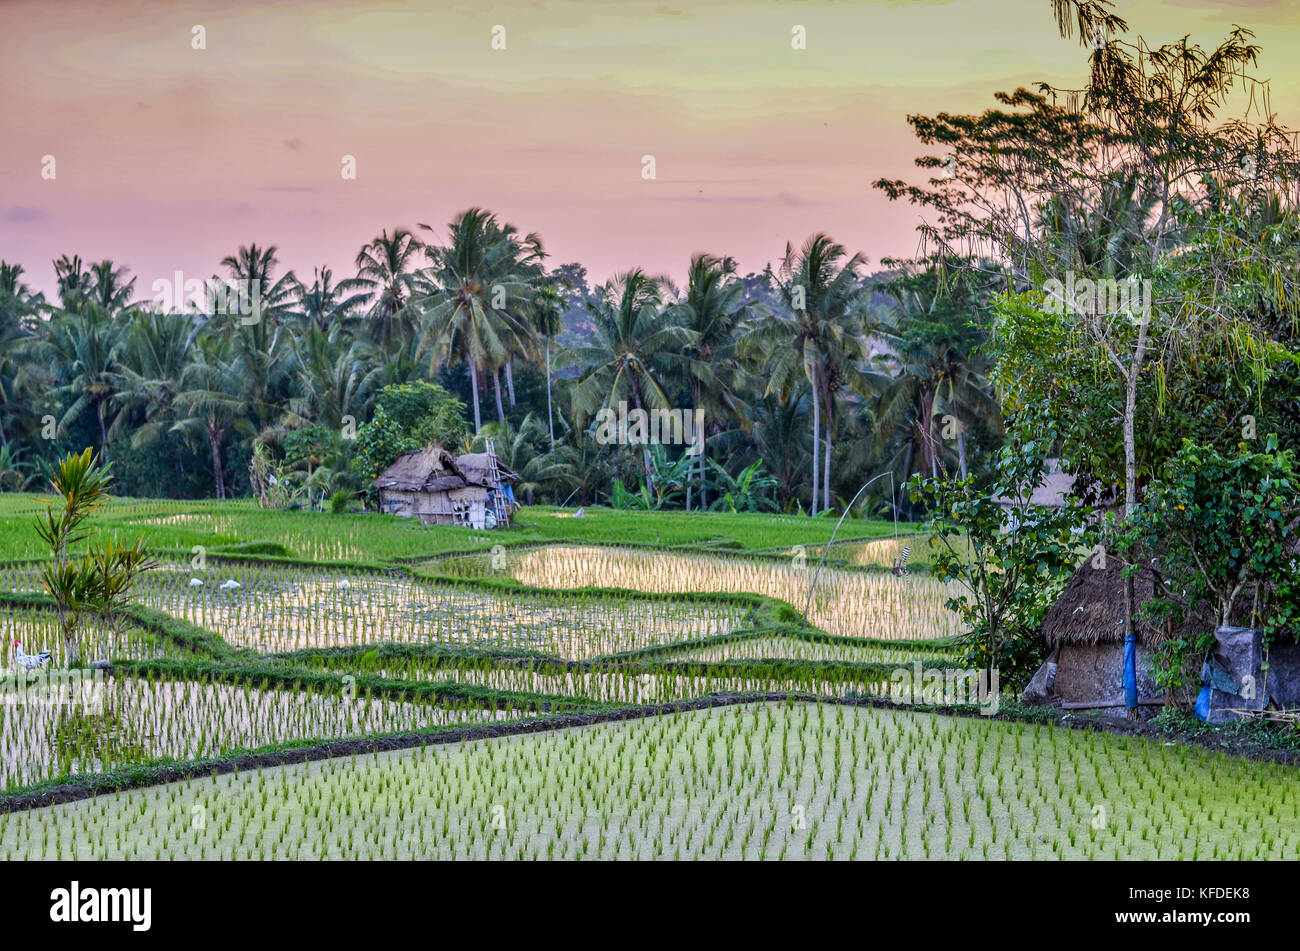 The landscape of paddy fields and dividing mud walls, with small green rice plants growing in shallow water. Stock Photo